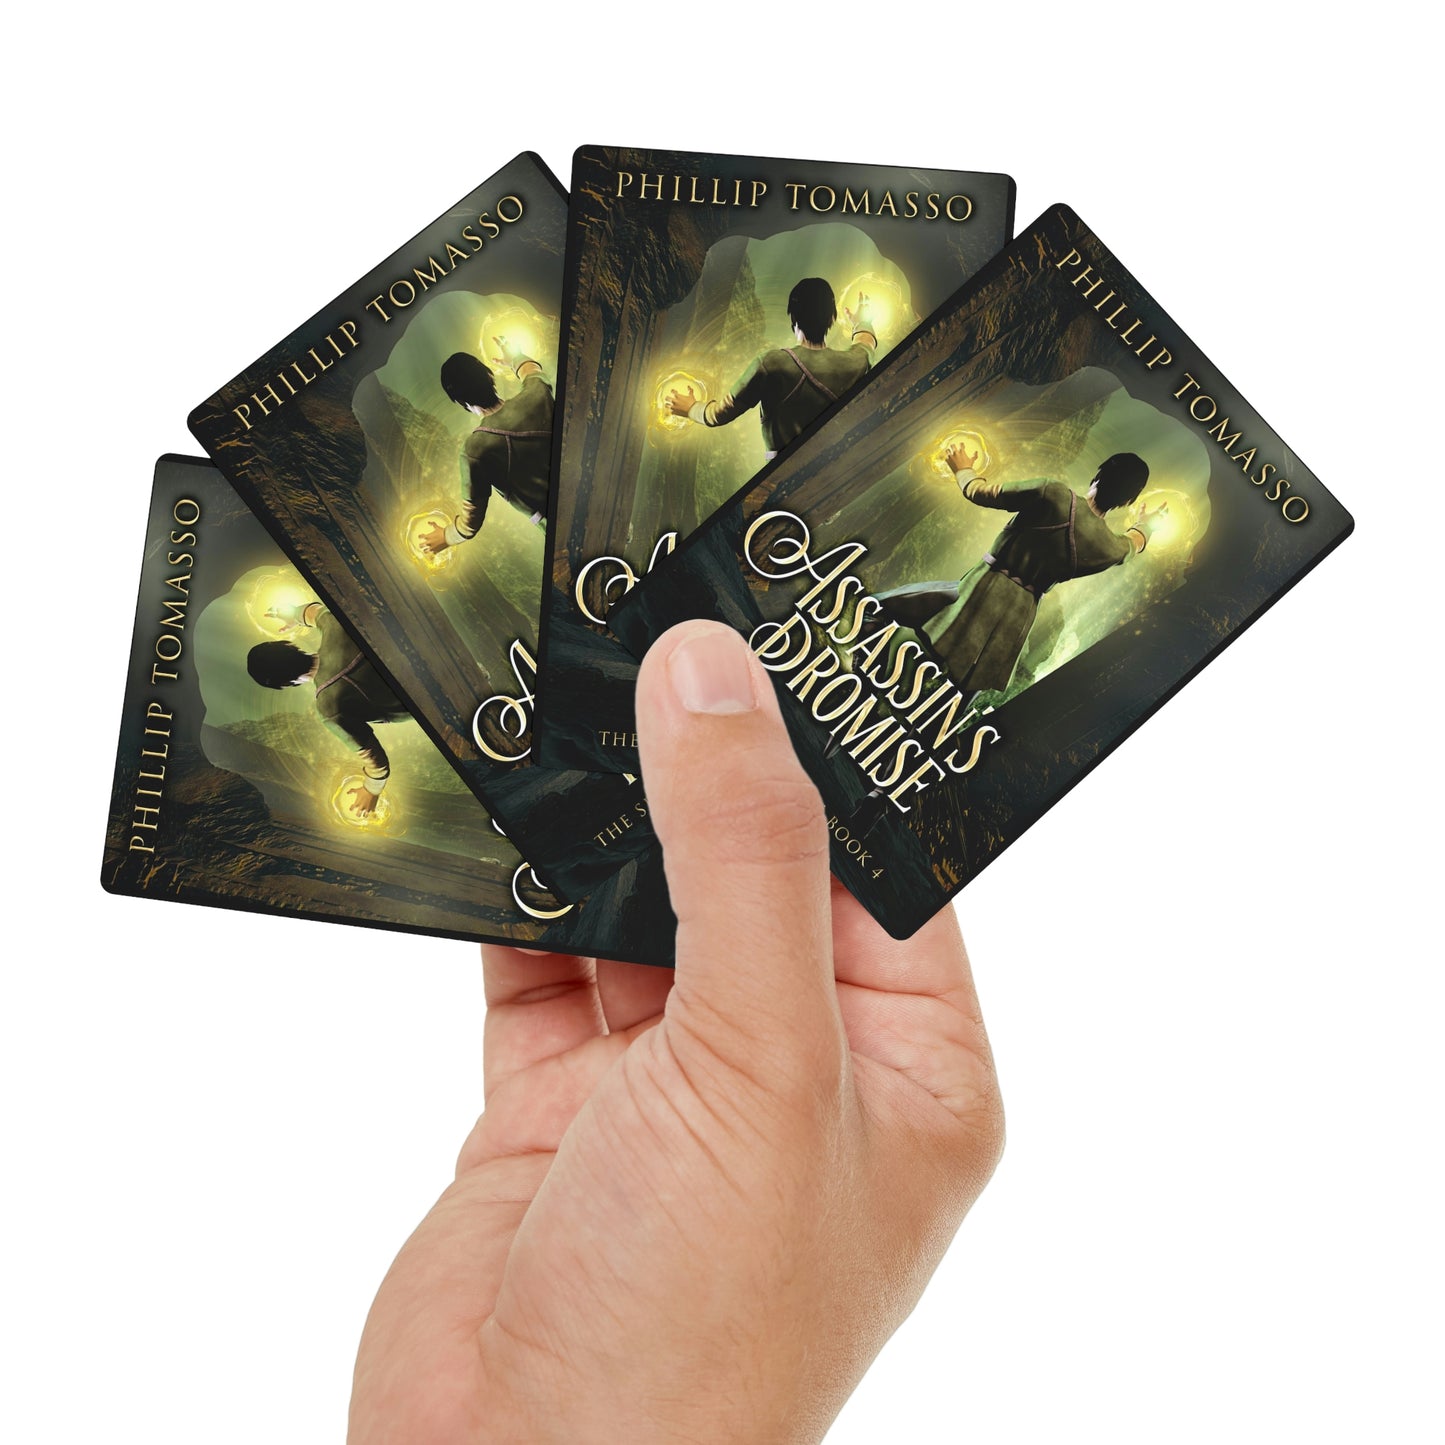 Assassin's Promise - Playing Cards